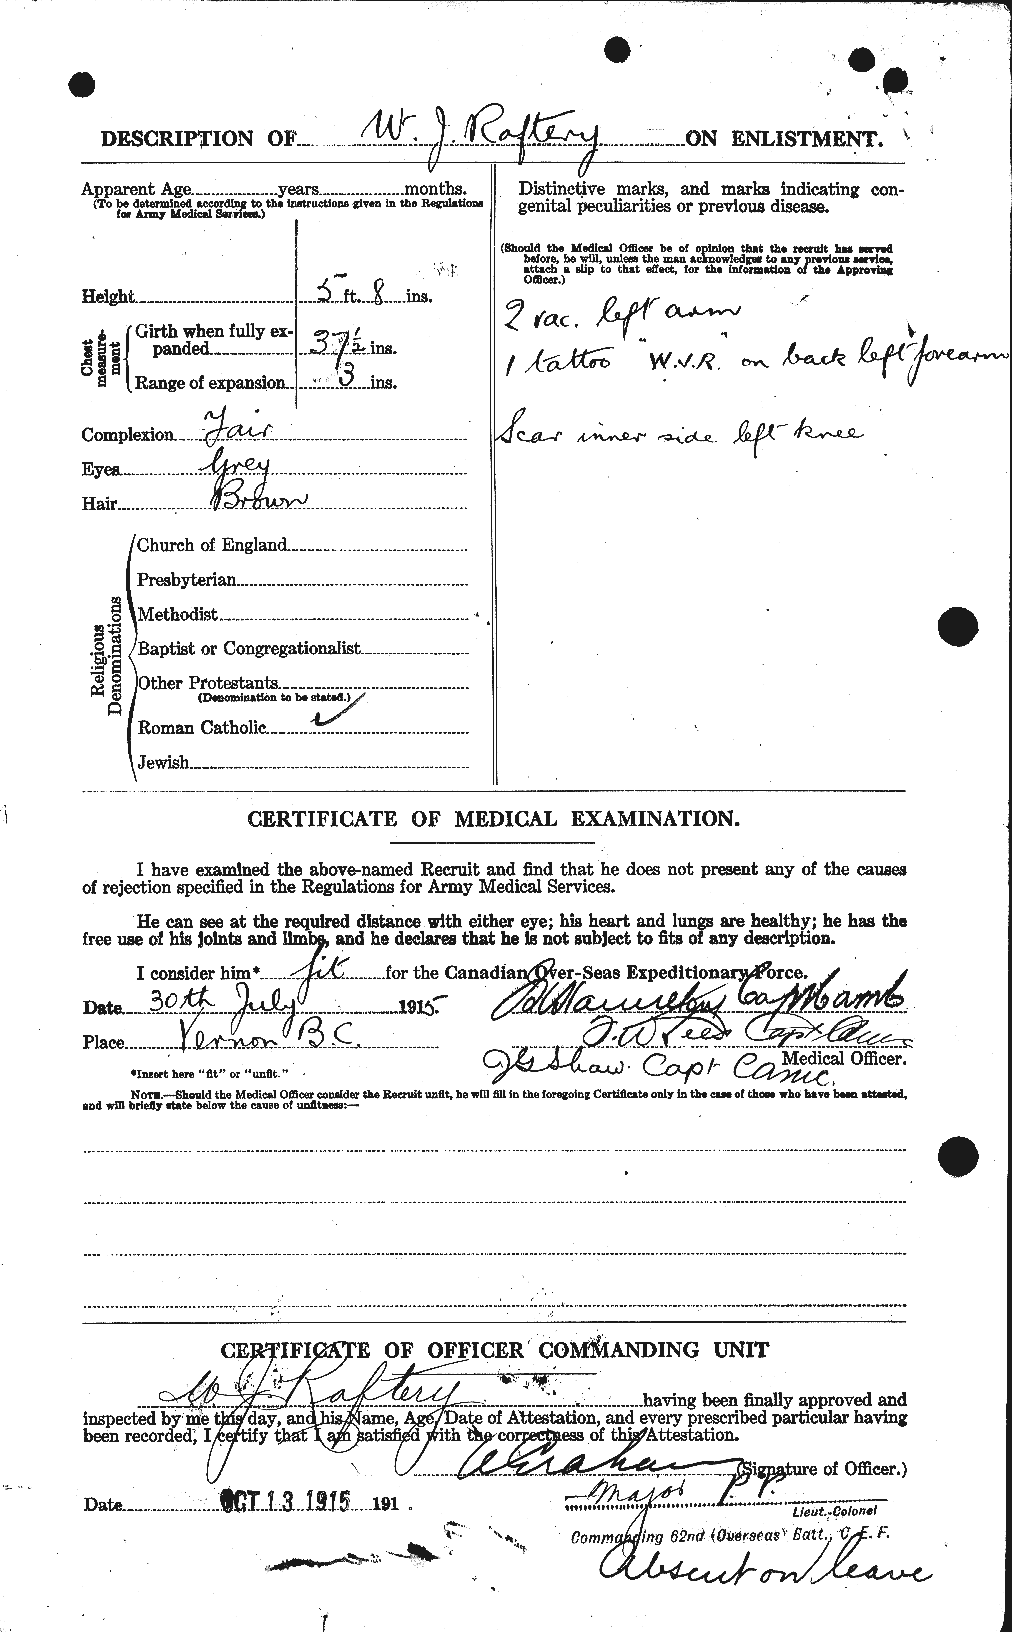 Personnel Records of the First World War - CEF 593023b